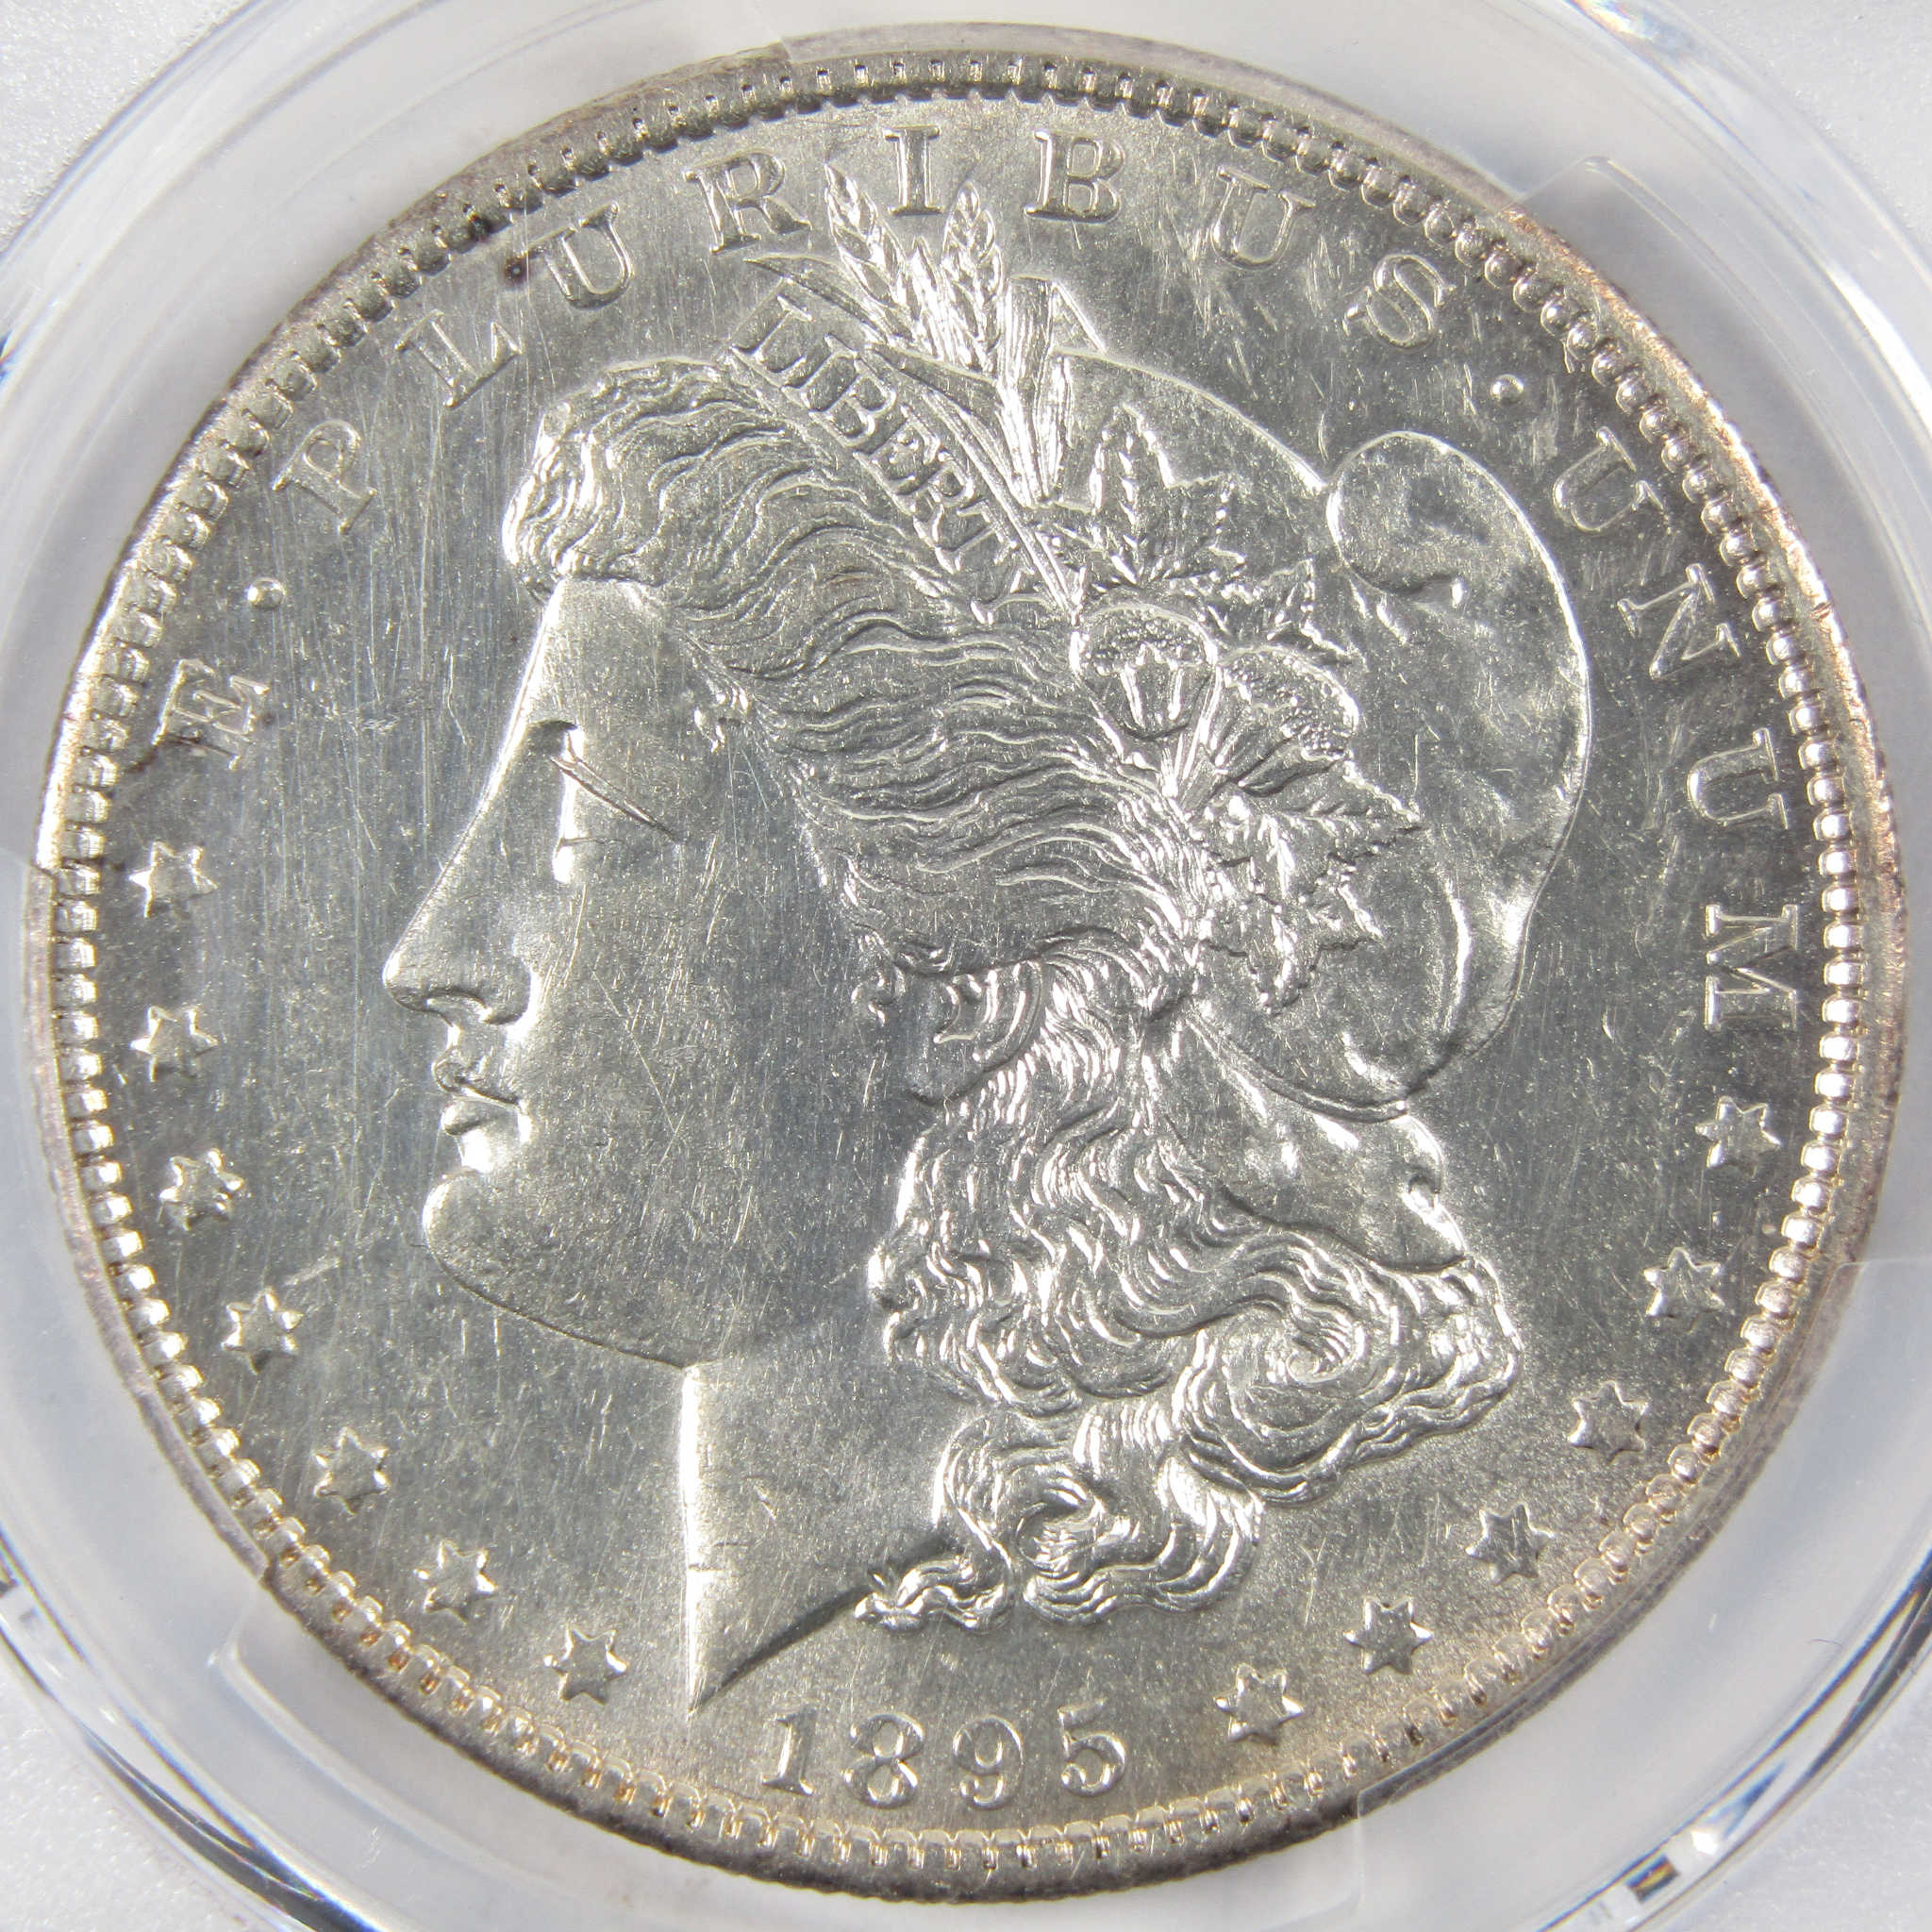 1895 O Morgan Dollar AU Details PCGS 90% Silver $1 Coin SKU:I9737 - Morgan coin - Morgan silver dollar - Morgan silver dollar for sale - Profile Coins &amp; Collectibles